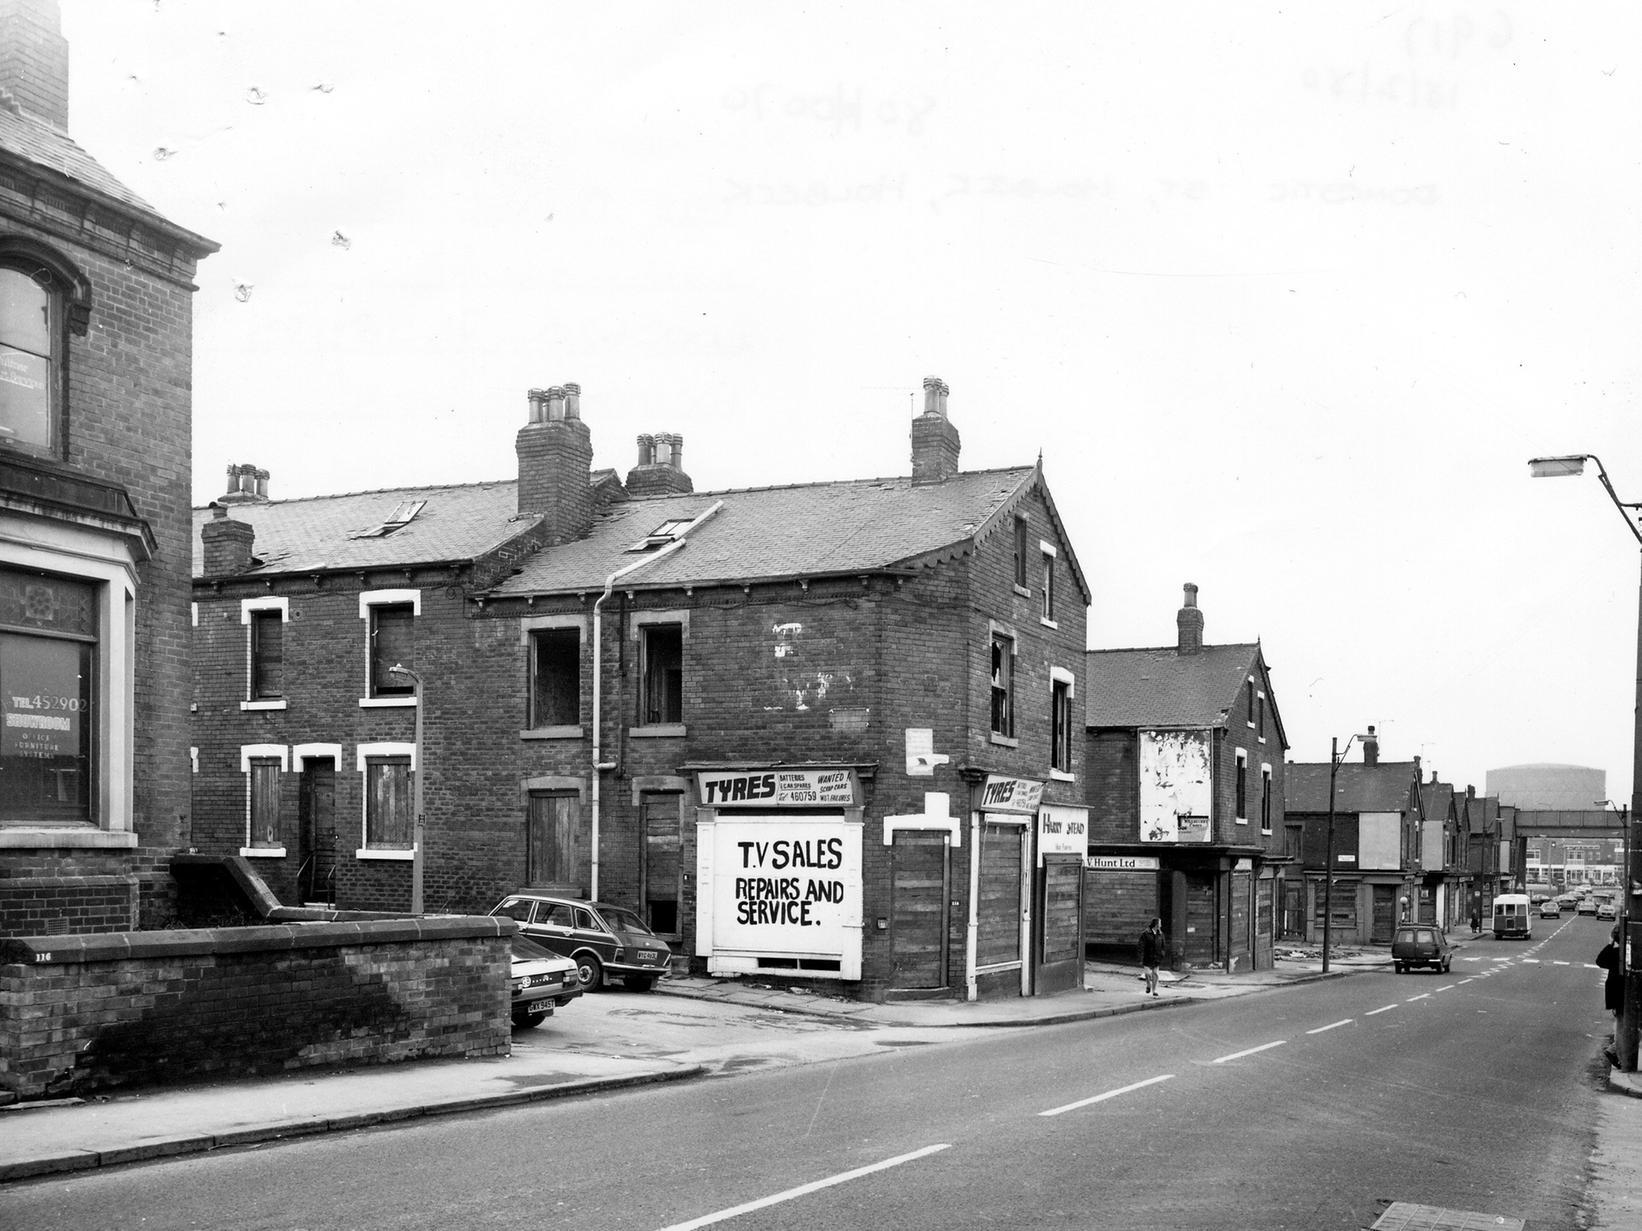 Domestic Street towards the railway viaduct. Houses and shops on Willoughby Avenue in the foreground, then Willoughby Grove, Willoughby Place and other Willoughbys, are all boarded up, were due to be demolished.